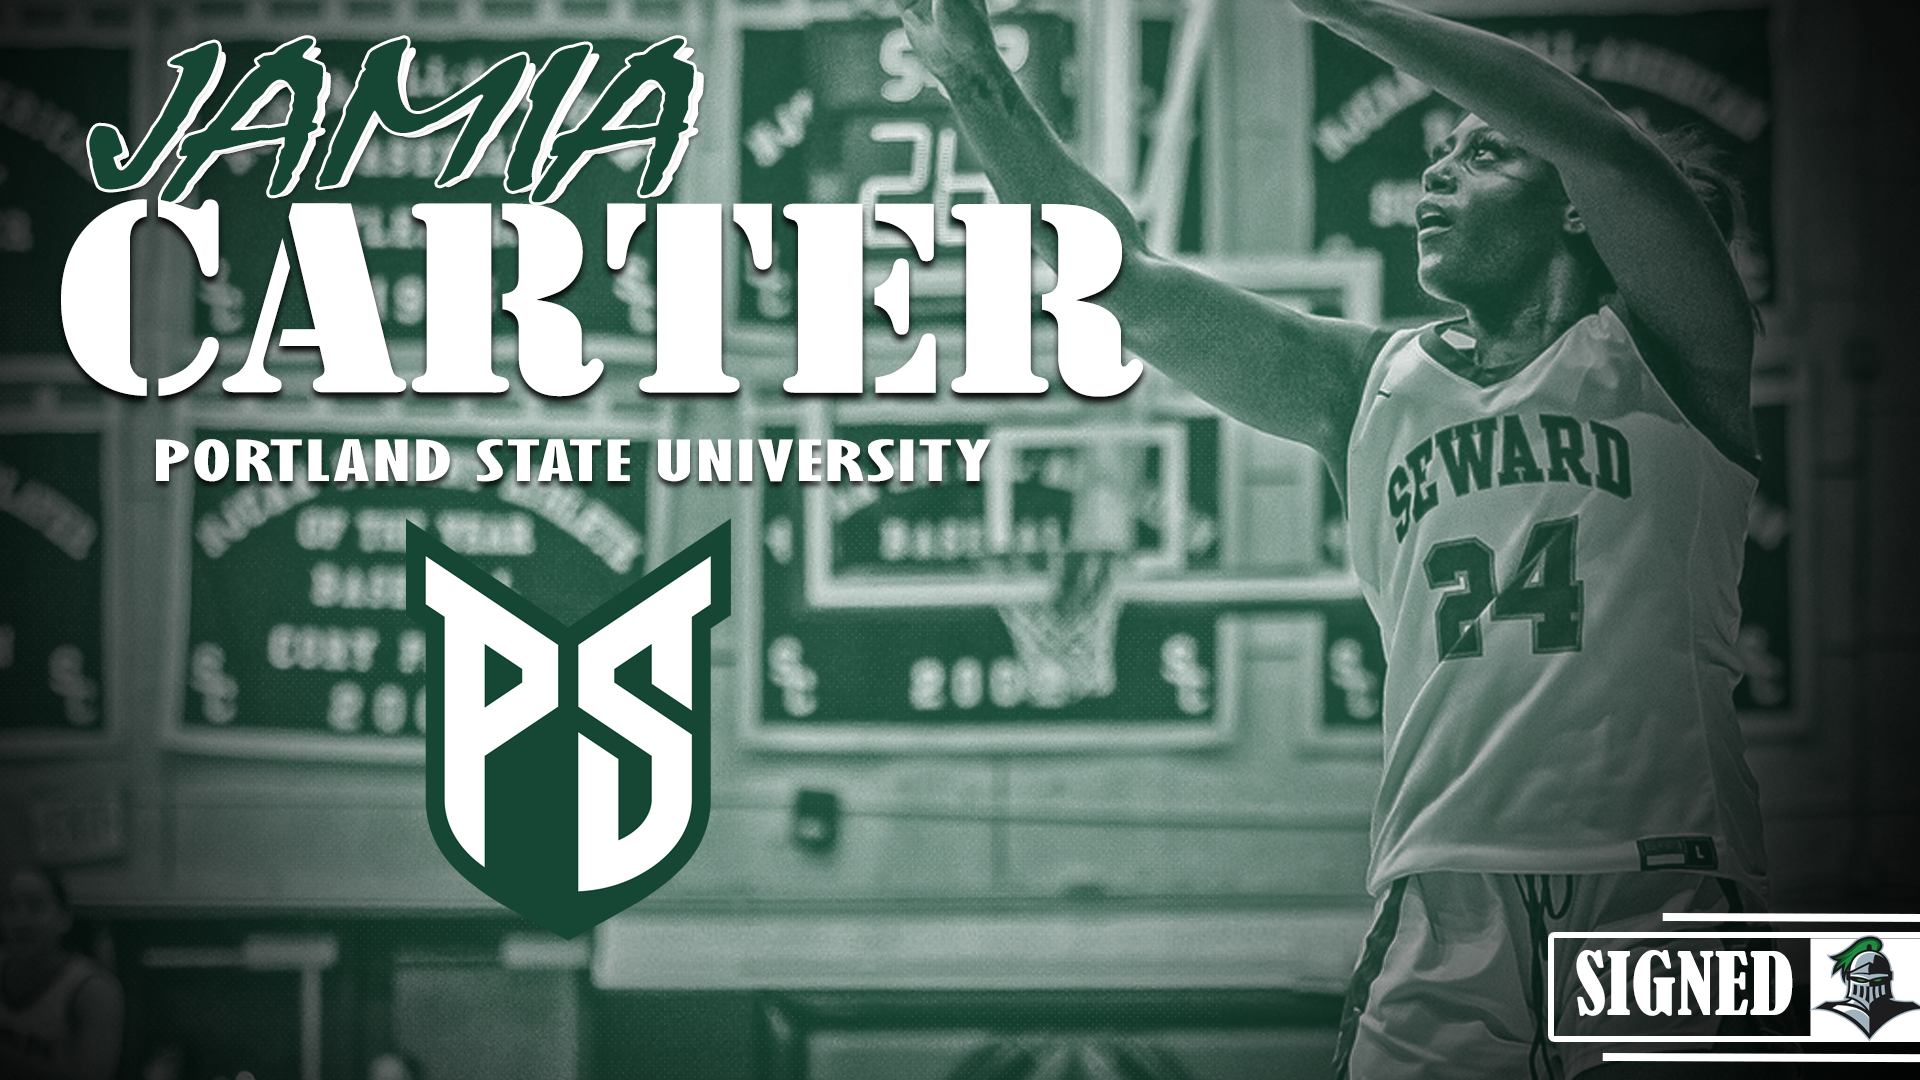 Lady Saints Leading Scorer Carter Signs with Portland State